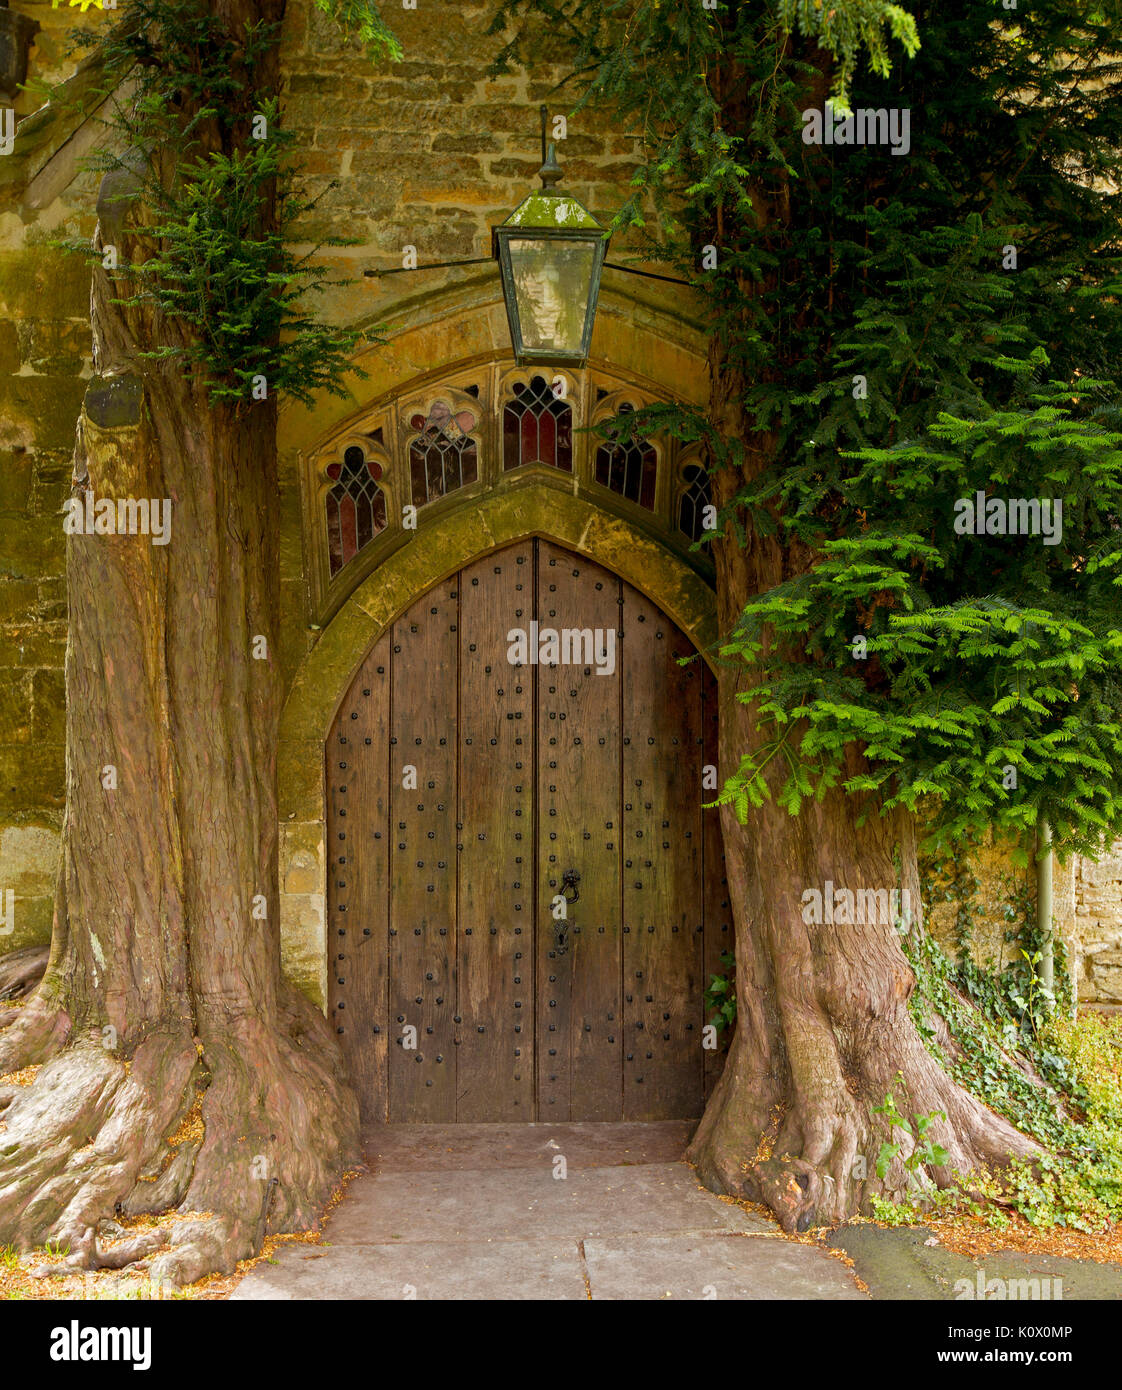 Unusual arched door framed by trunks of 200 year old yew trees at medieval St. Edward's church at Stow-on-the-wold, England Stock Photo